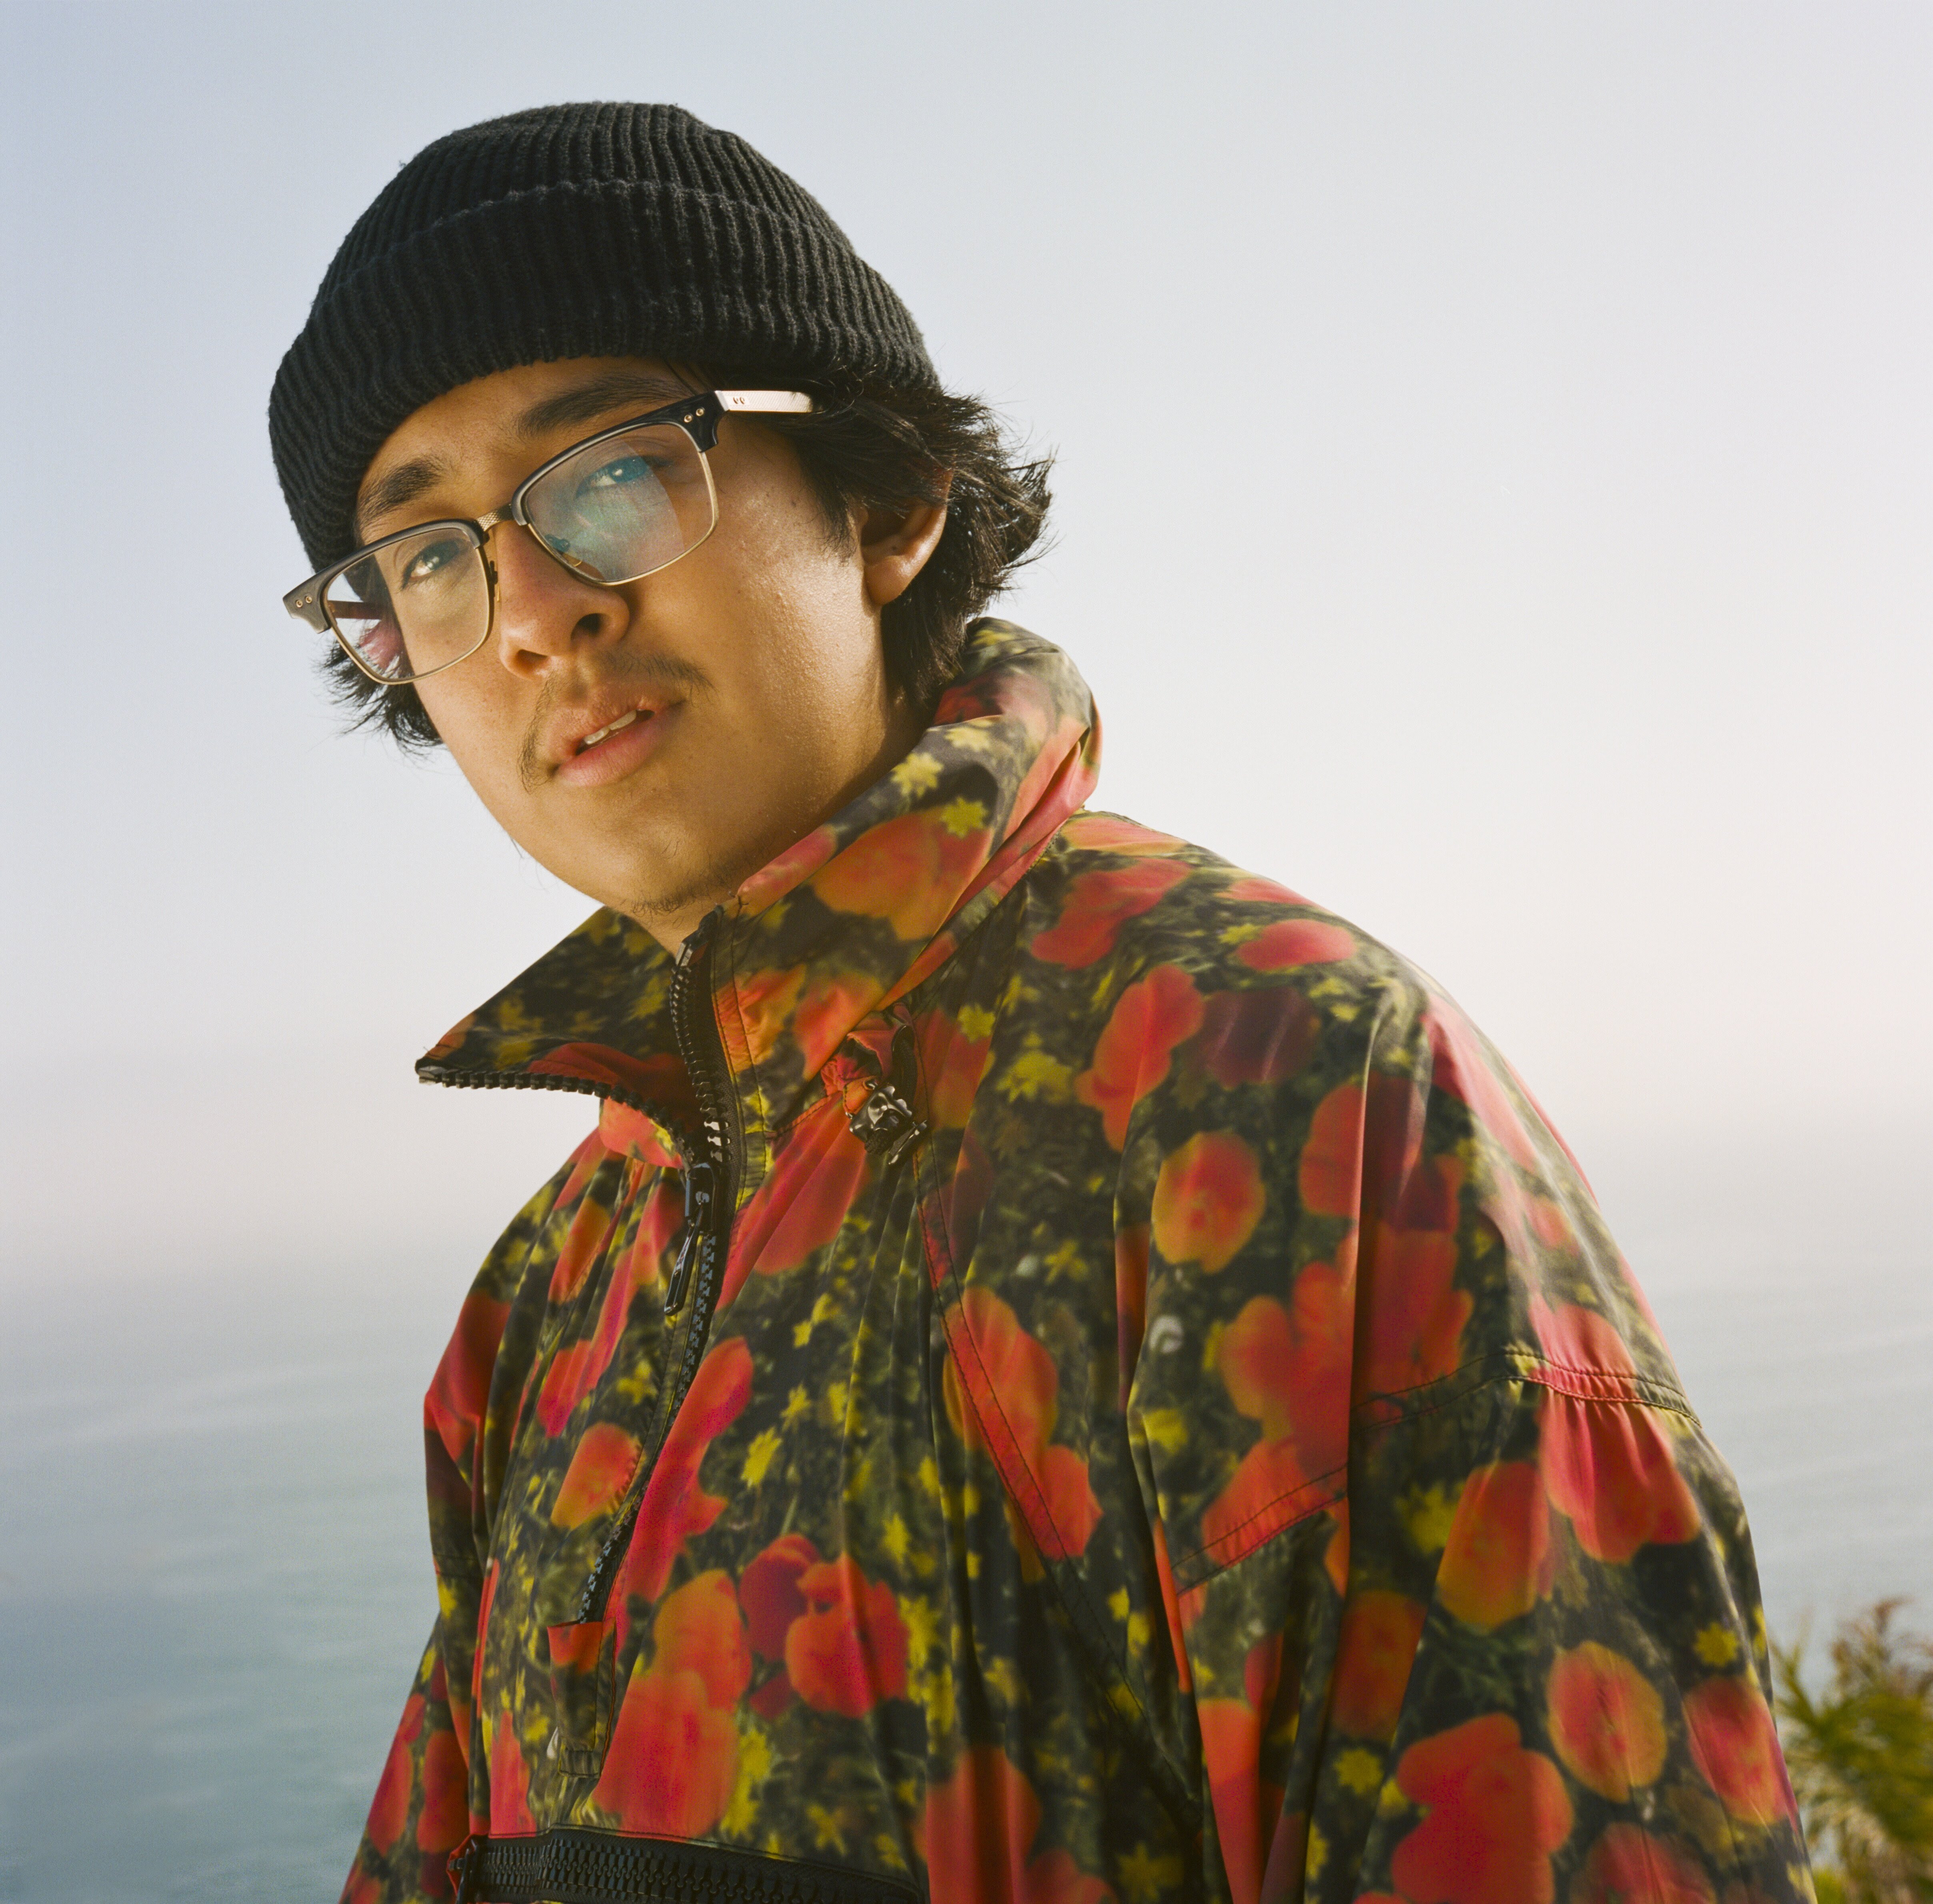 Cuco releases a new video for "Keeping Tabs" featuring Suscato